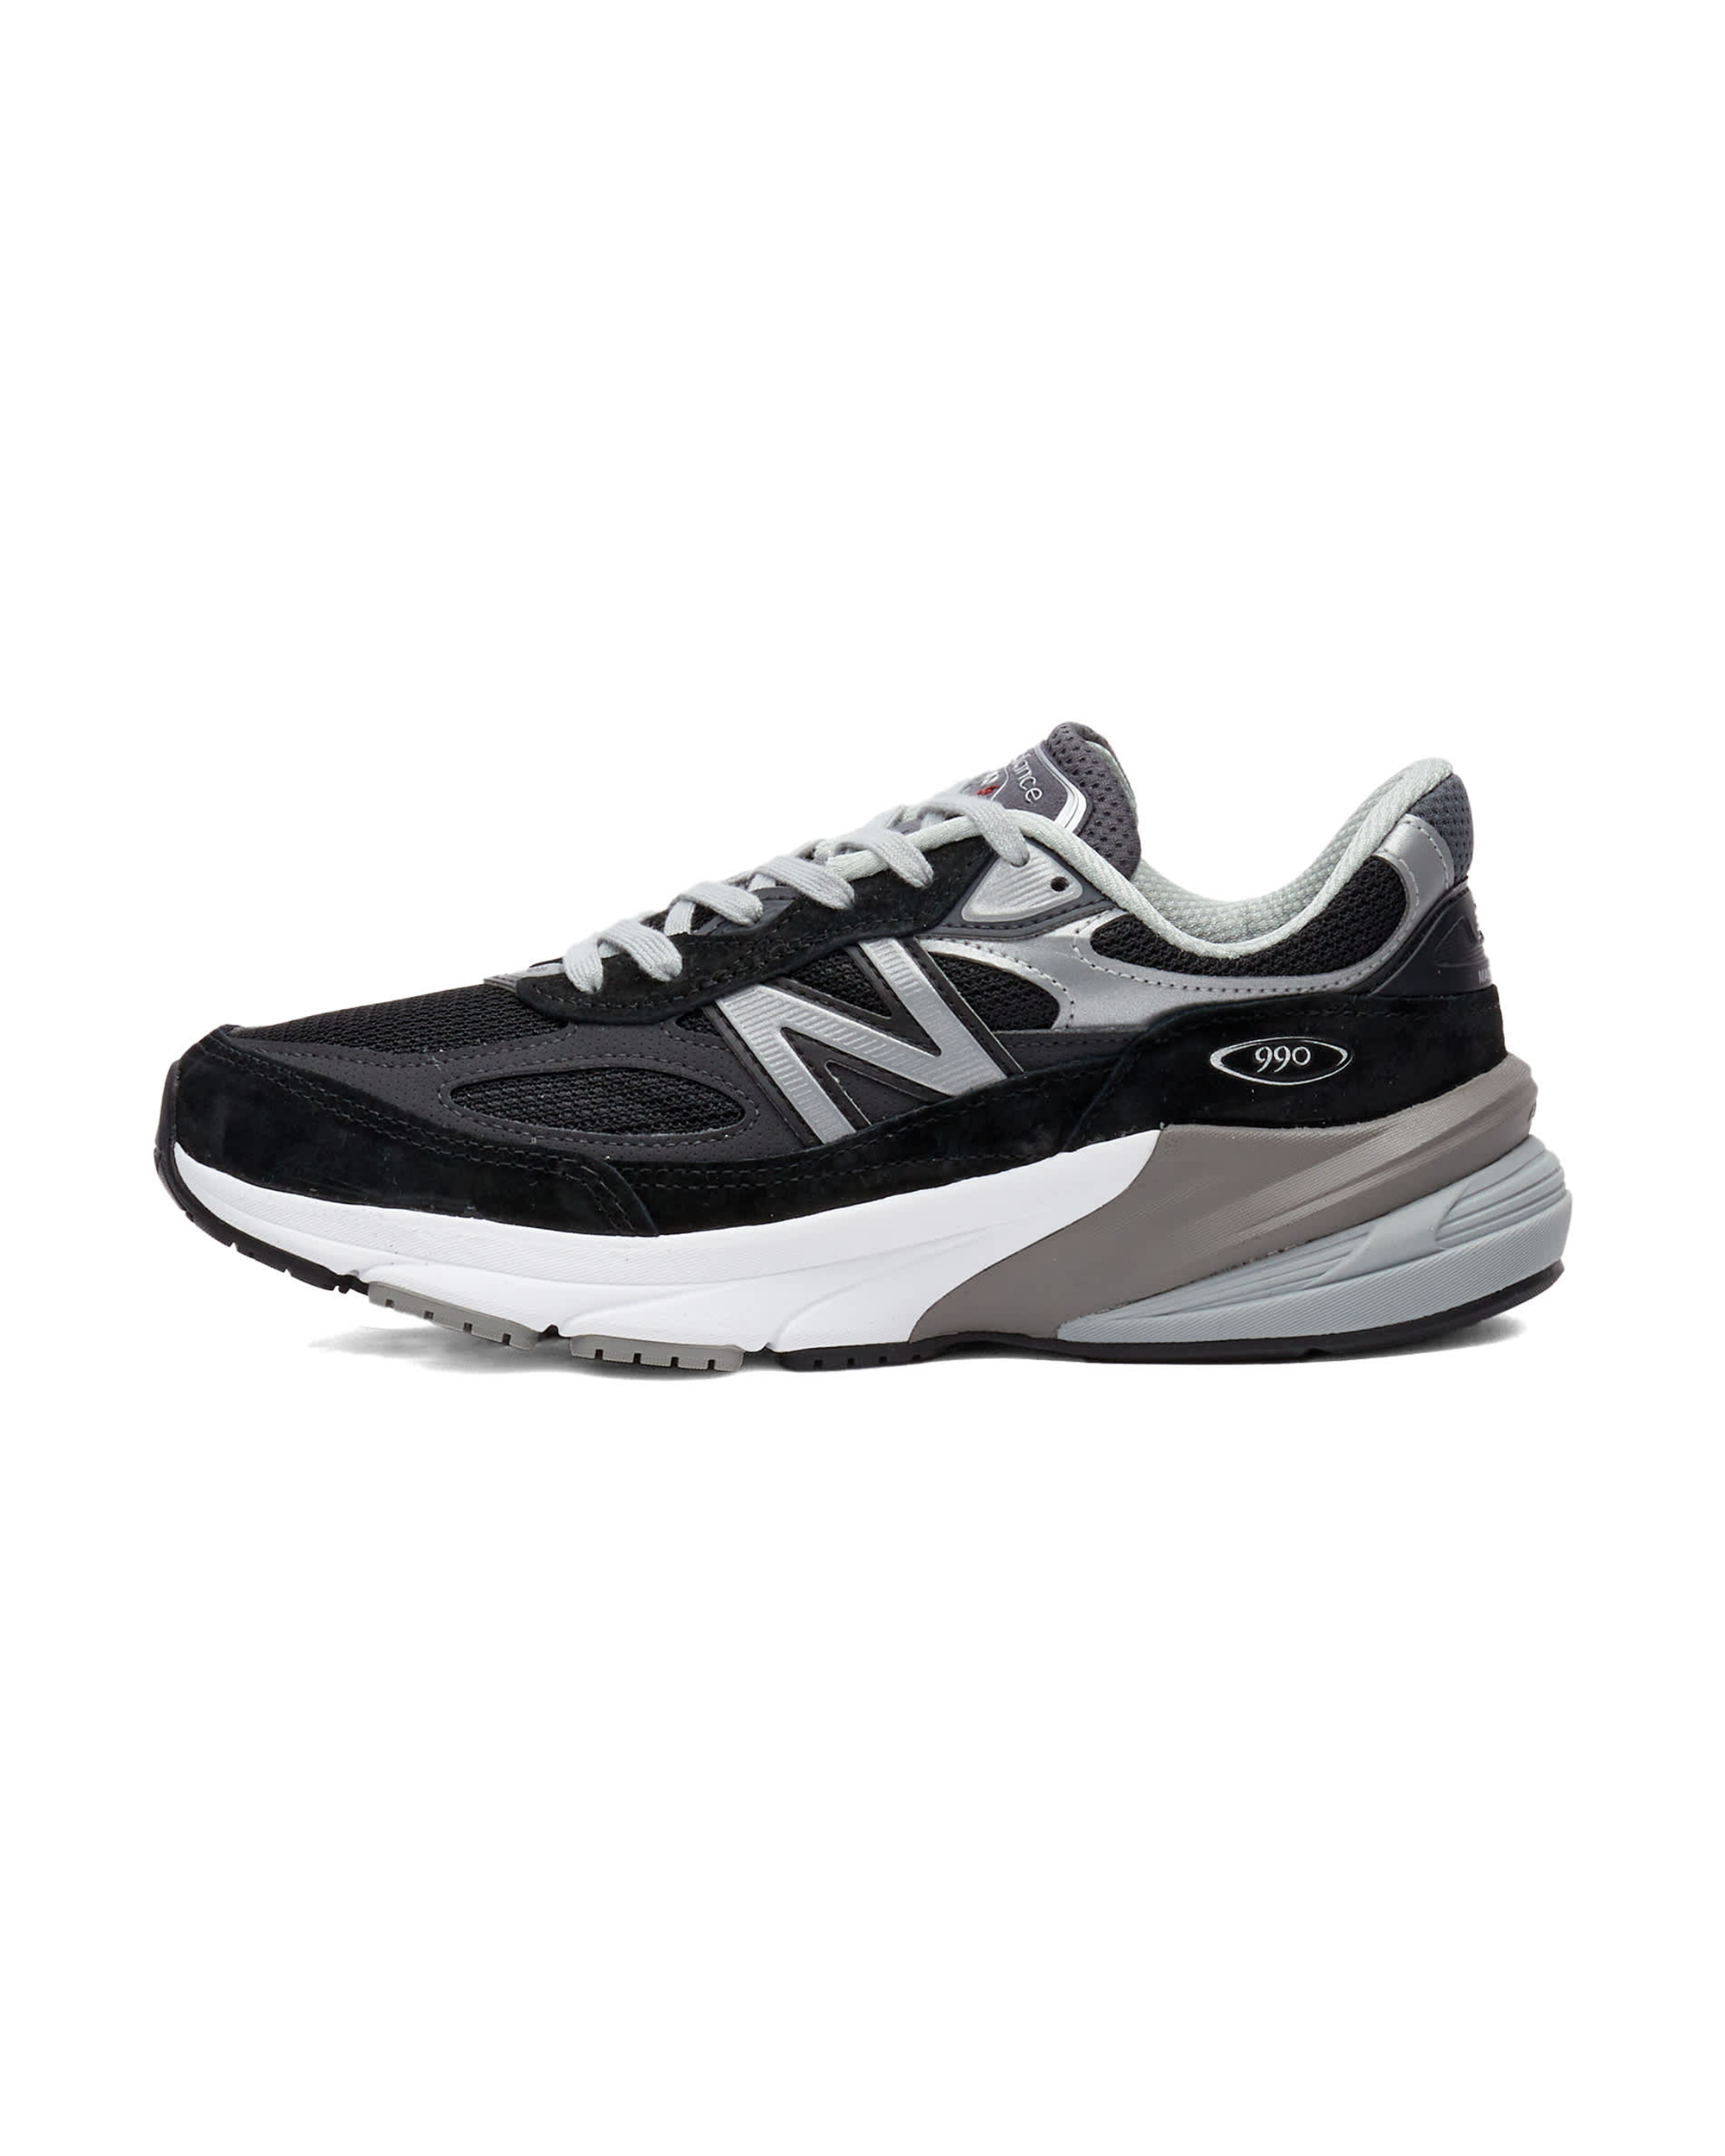 Womens 990v6 - Black / White – HIGHS AND LOWS